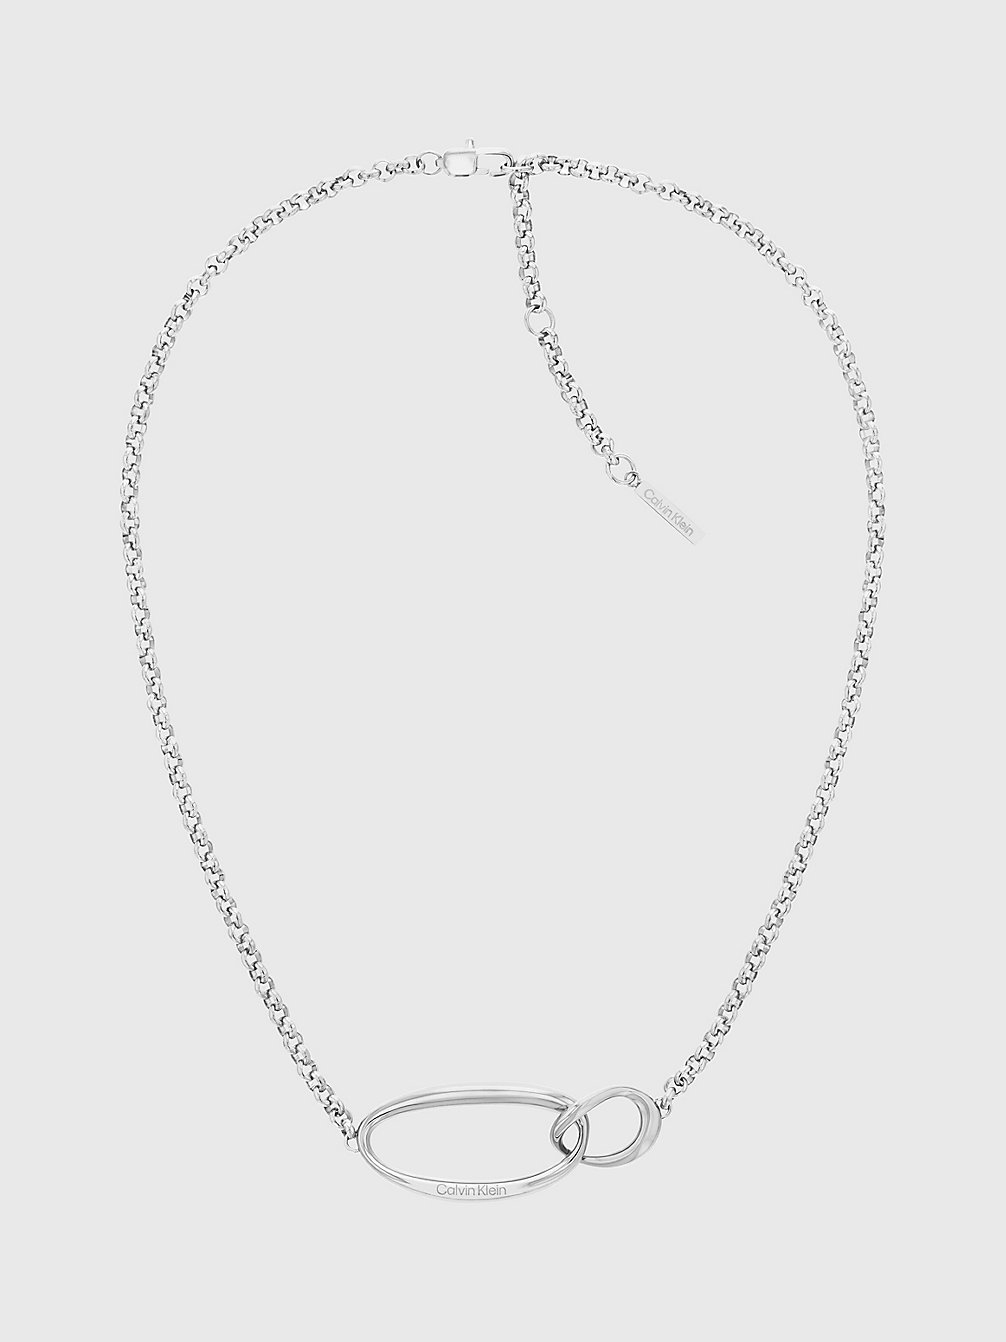 Collier - Playful Organic Shapes > SILVER > undefined femmes > Calvin Klein